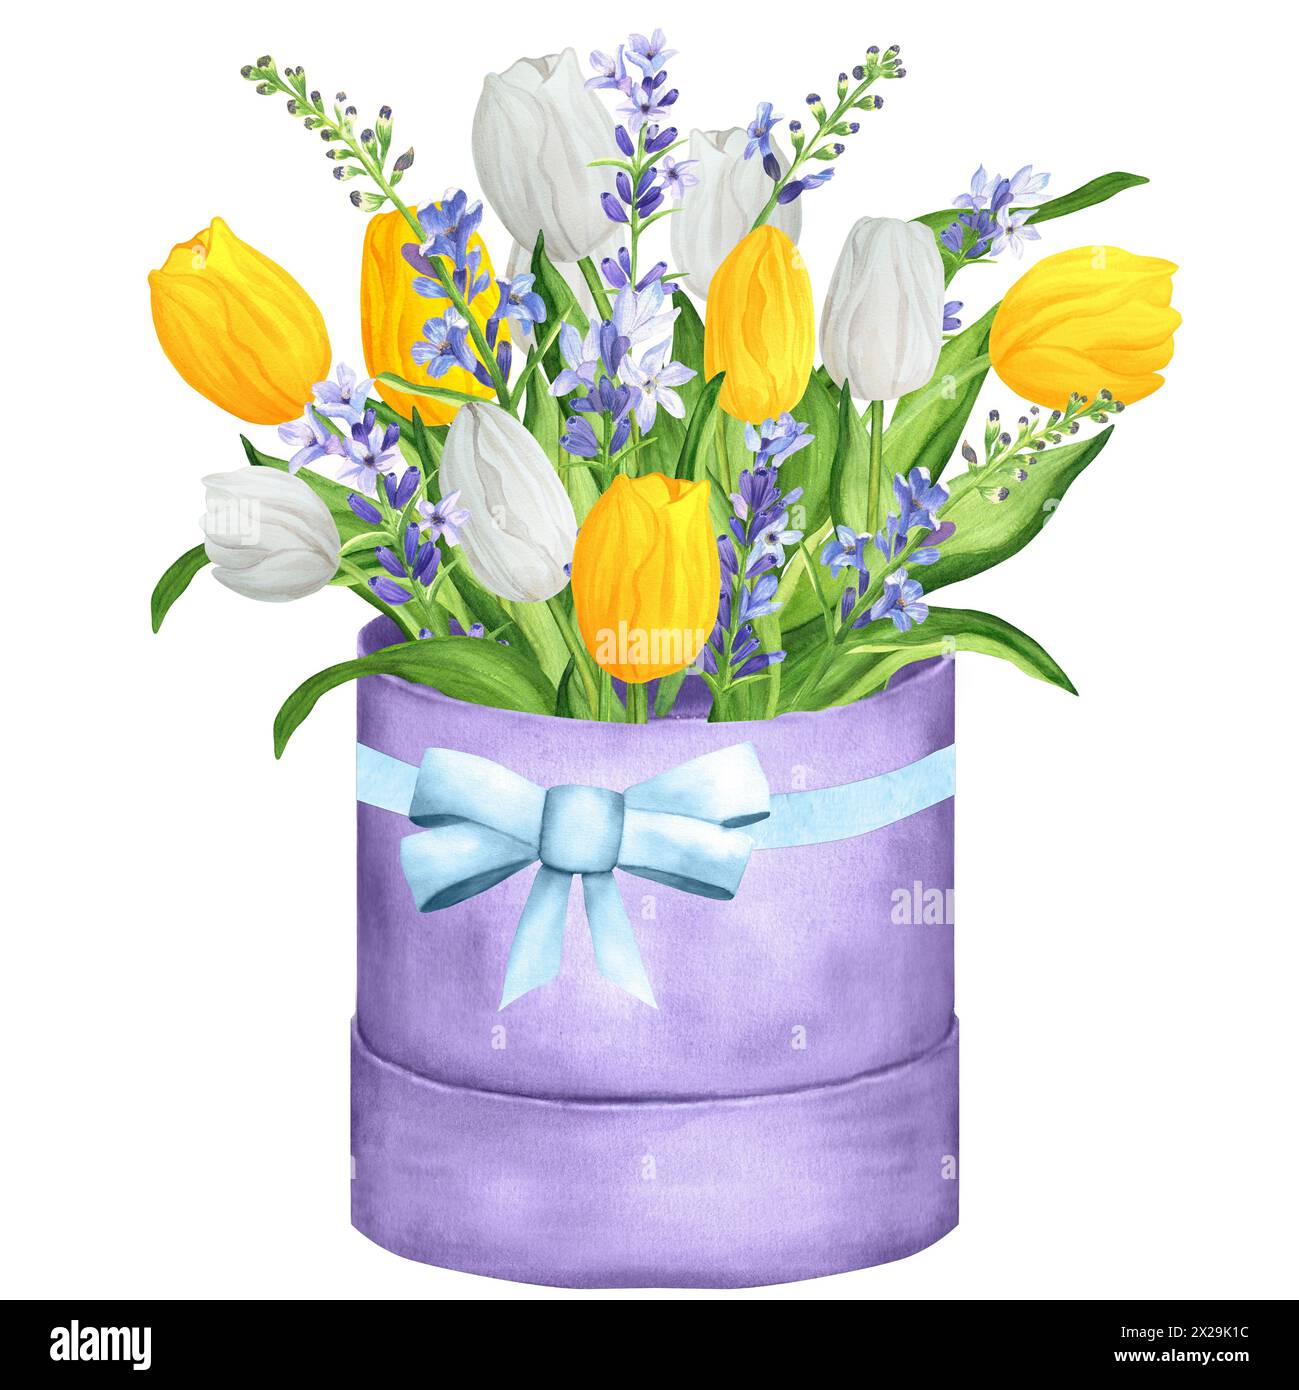 Hand-drawn watercolor illustration. Flower bouquet with white and yellow tulips, lavender and green leaves. Spring holiday bouquet in a box Stock Photo